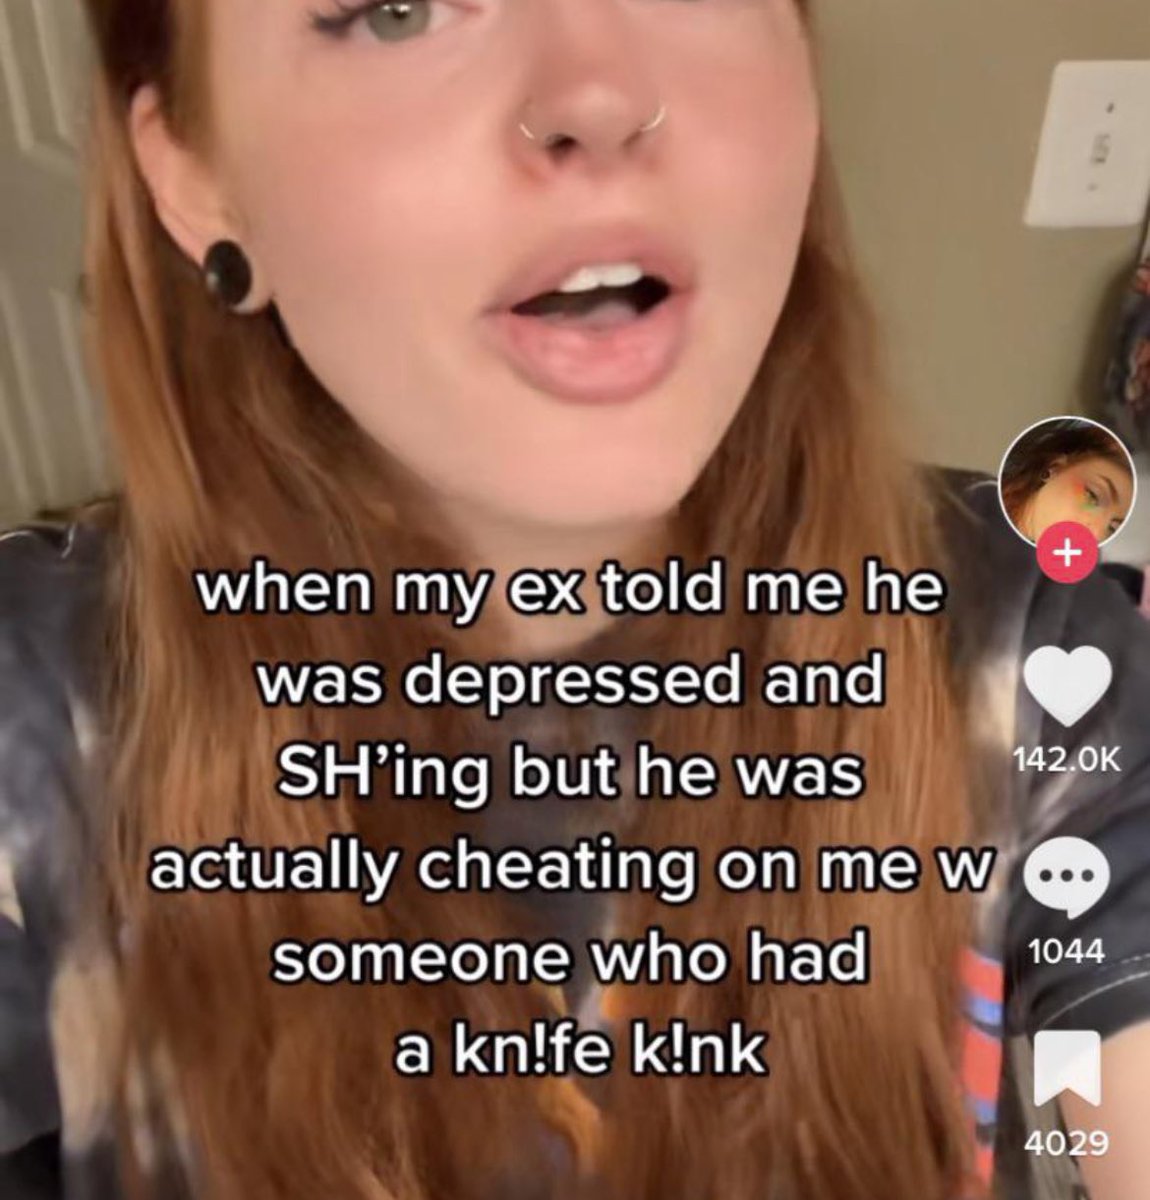 TikTok screenshots - lip - when my ex told me he was depressed and Sh'ing but he was actually cheating on me w someone who had a kn!fe k!nk 1044 4029